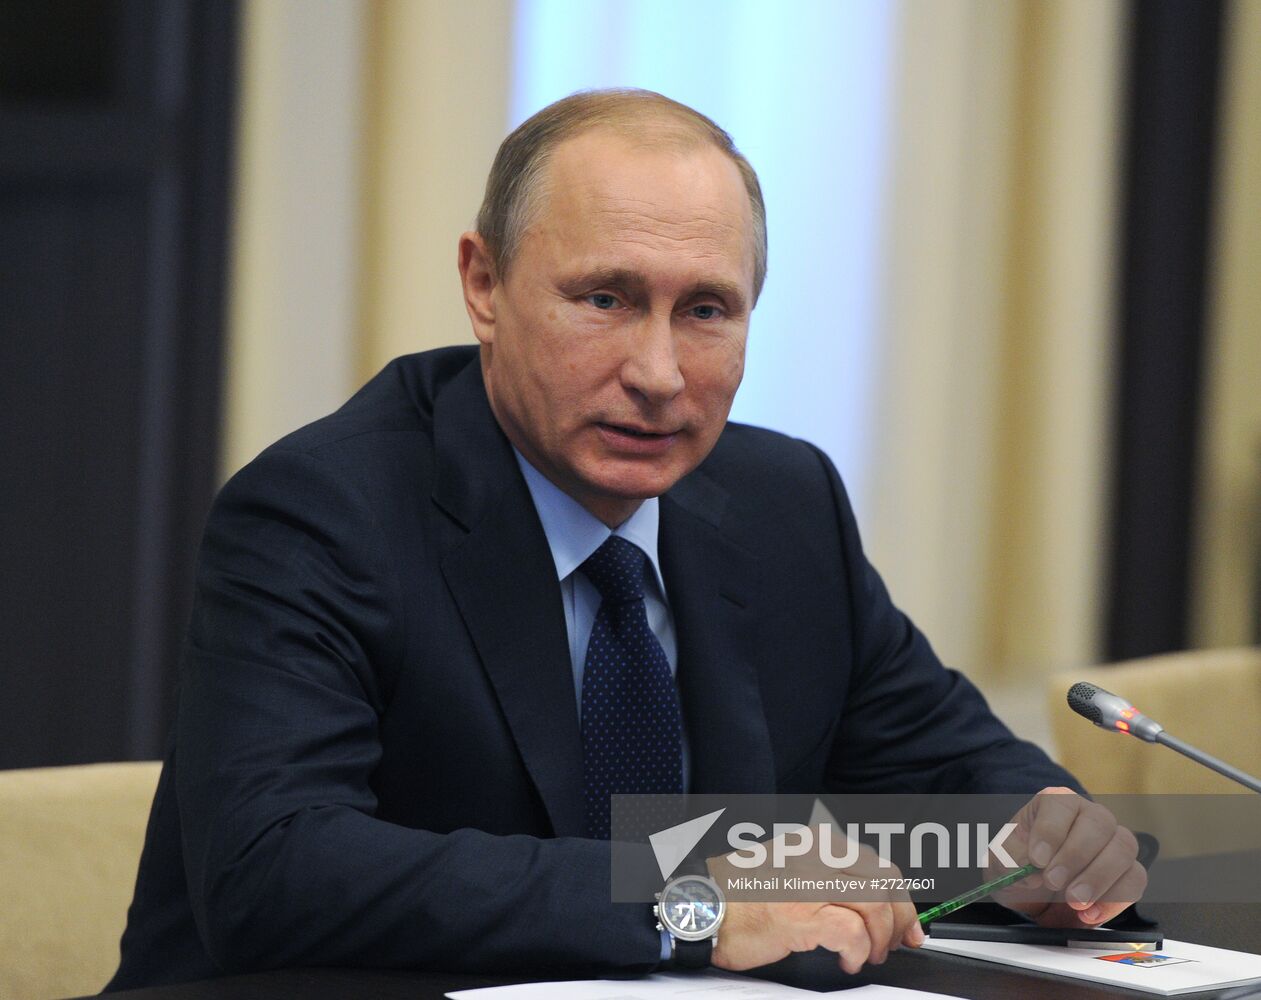 President Vladimir Putin's meeting with heads of security and intelligence agencies delegations